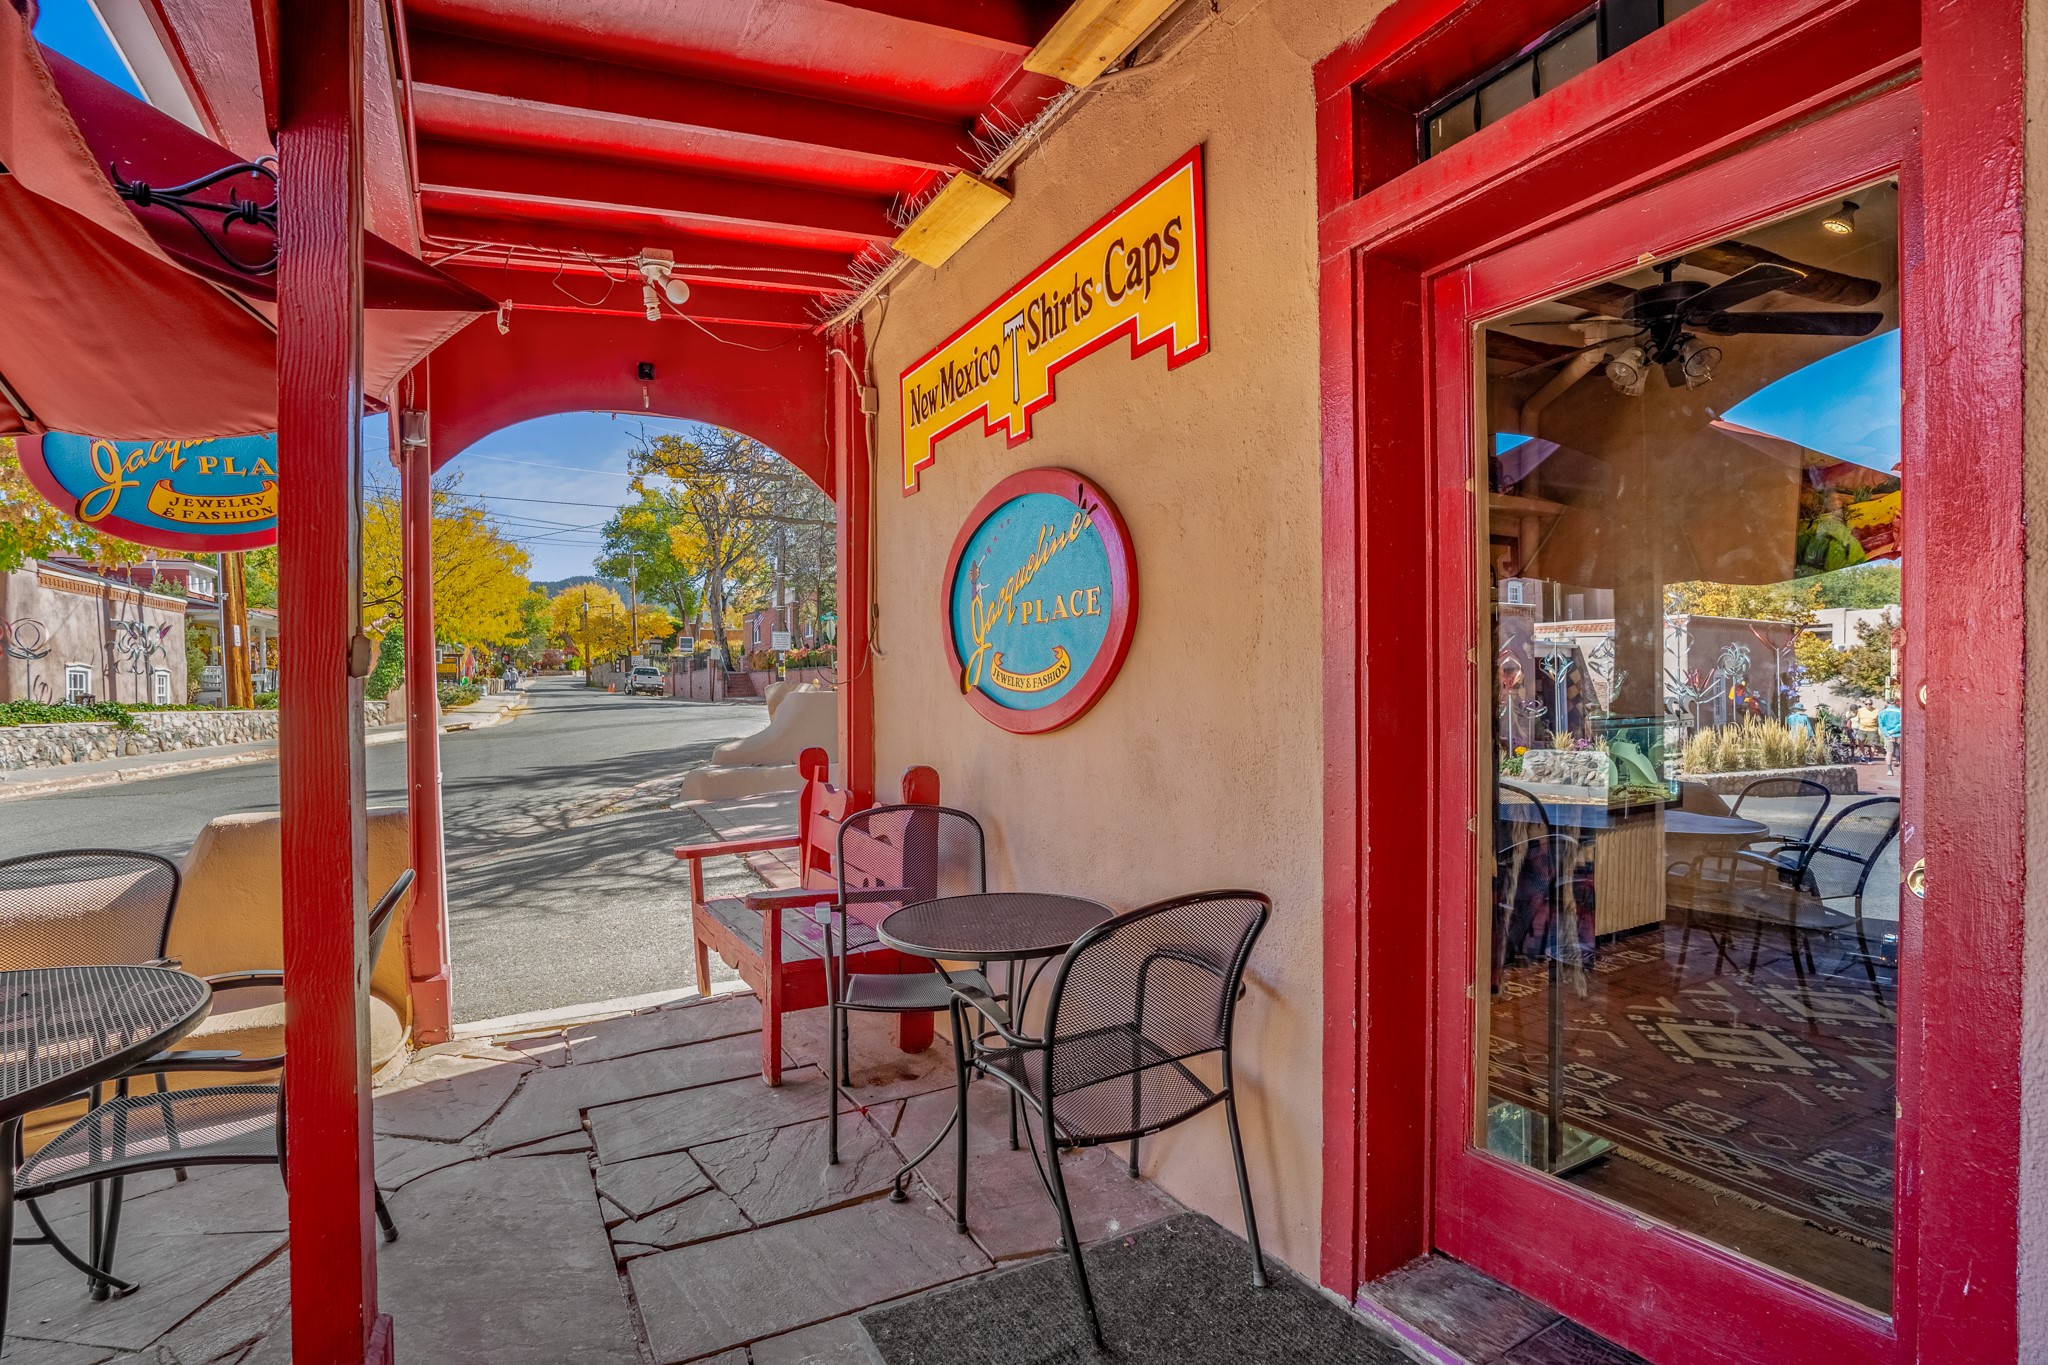 233 CANYON Road, Santa Fe, New Mexico 87501, ,Commercial Sale,For Sale,233 CANYON Road,202341335